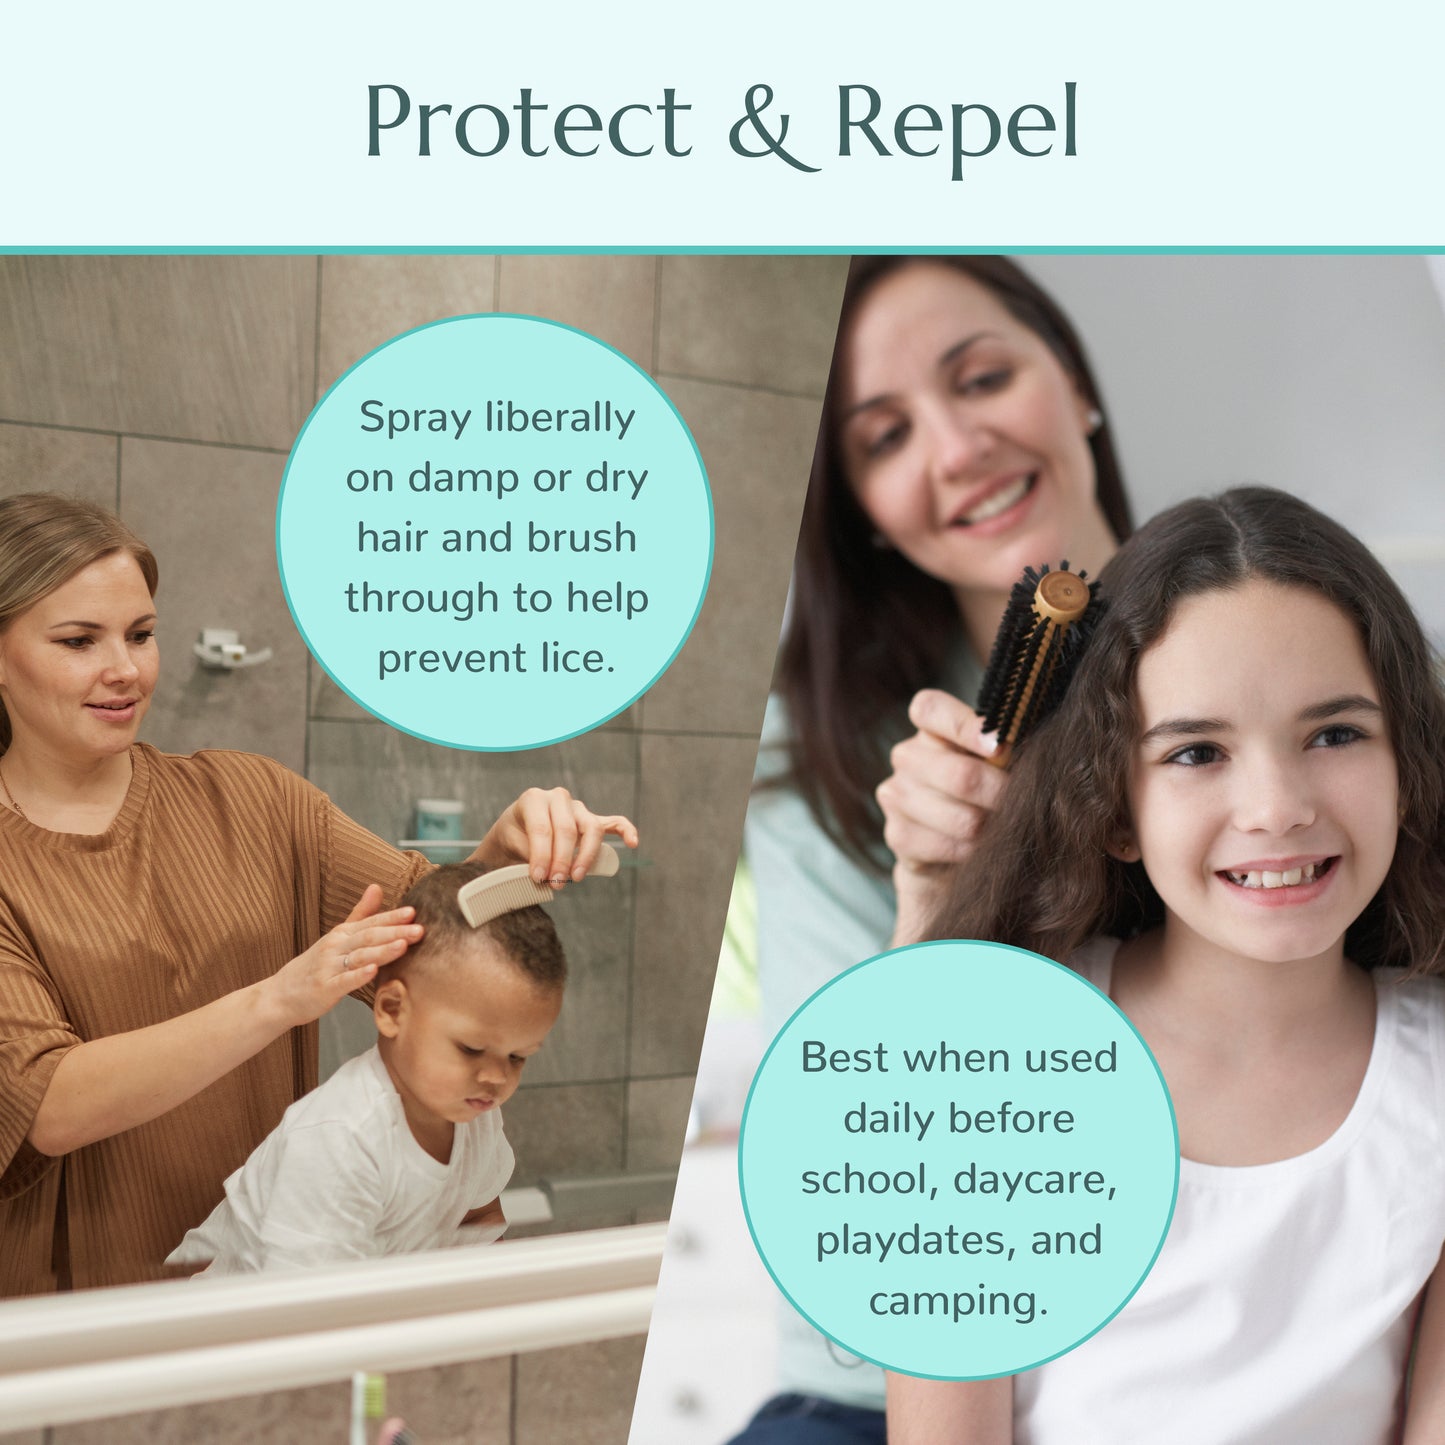 Protect and Repel - Spray liberally on damp or dry hair and brush through to prevent lice. Best when used daily before school, daycare, playdates and camping.